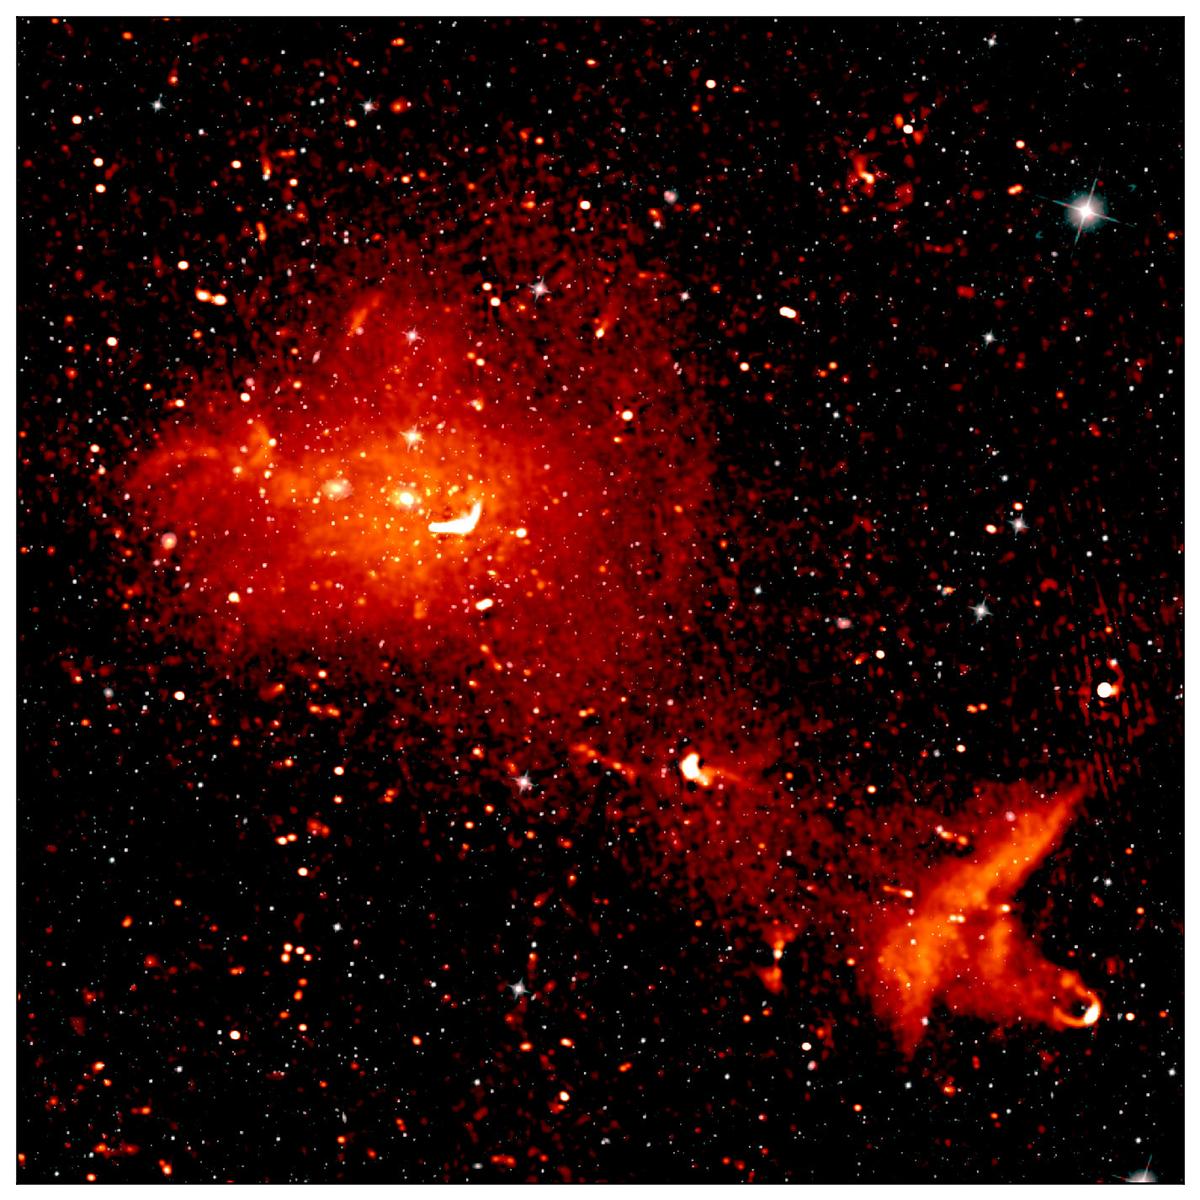 Most galaxies captured in these images are billions of light-years away. (SWNS)